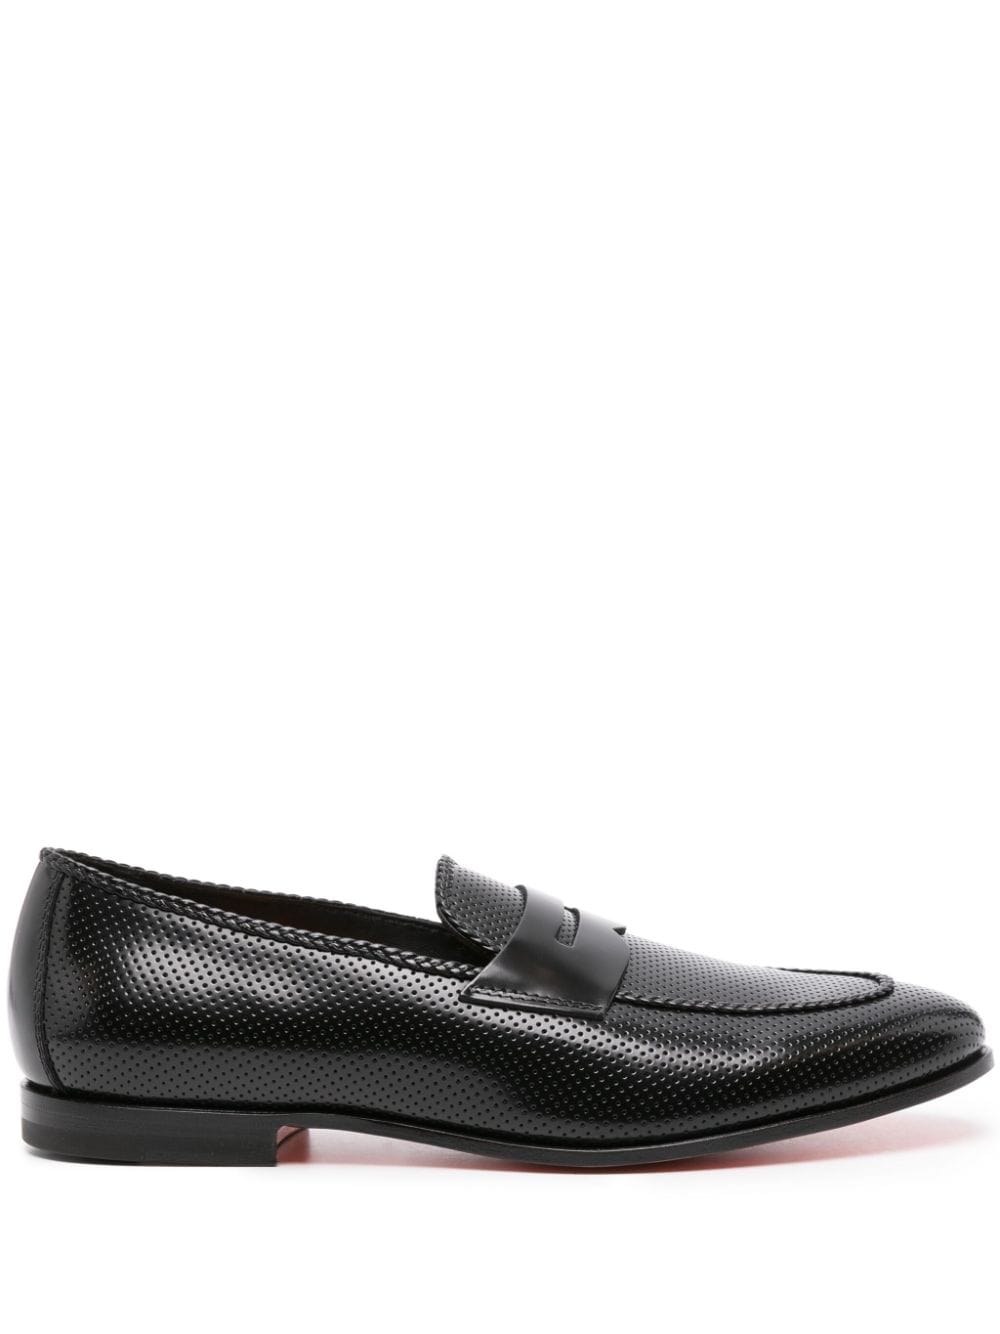 Santoni perforated leather penny loafers - Nero